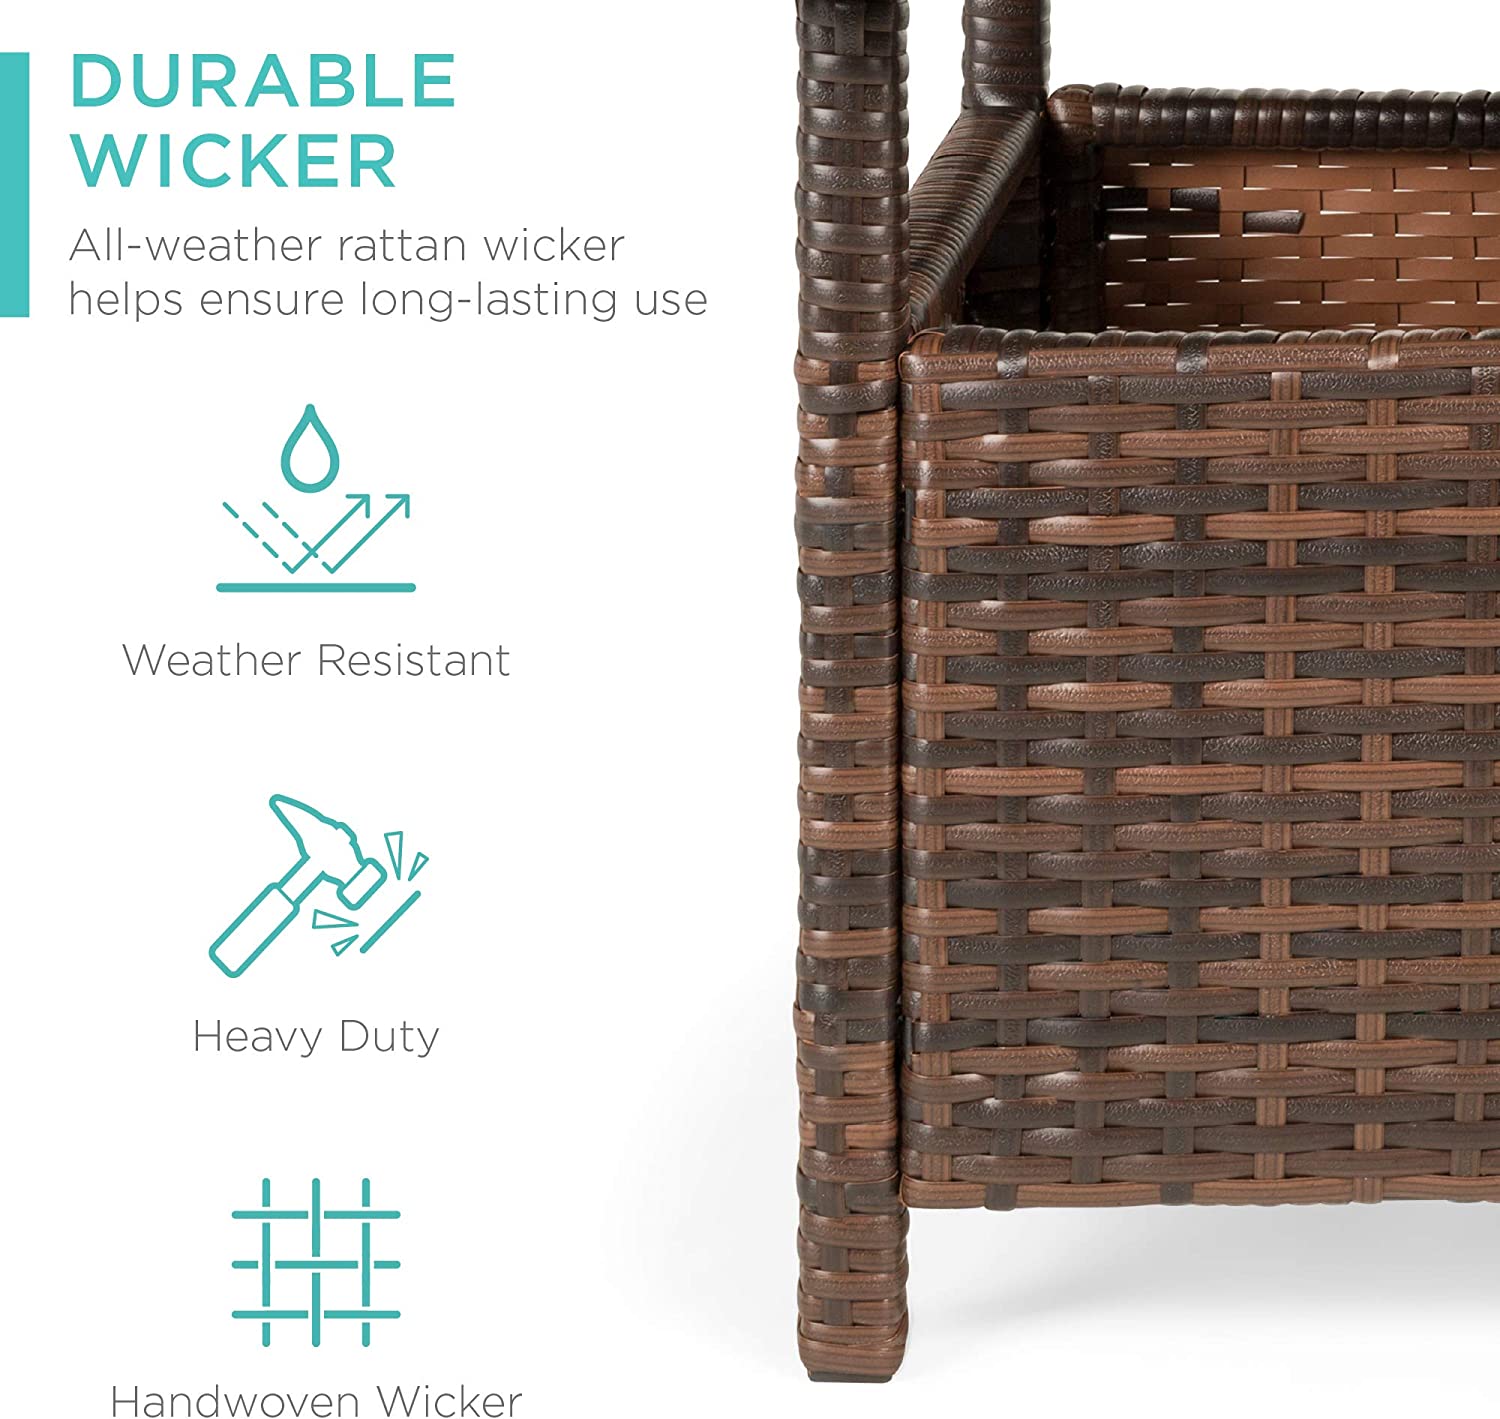 Wicker Side Table with Umbrella Hole, Square PE Rattan Outdoor End Table for Patio, Garden, Poolside, Deck w/UV-Resistant Frame, Storage Space, Brown - image 2 of 7